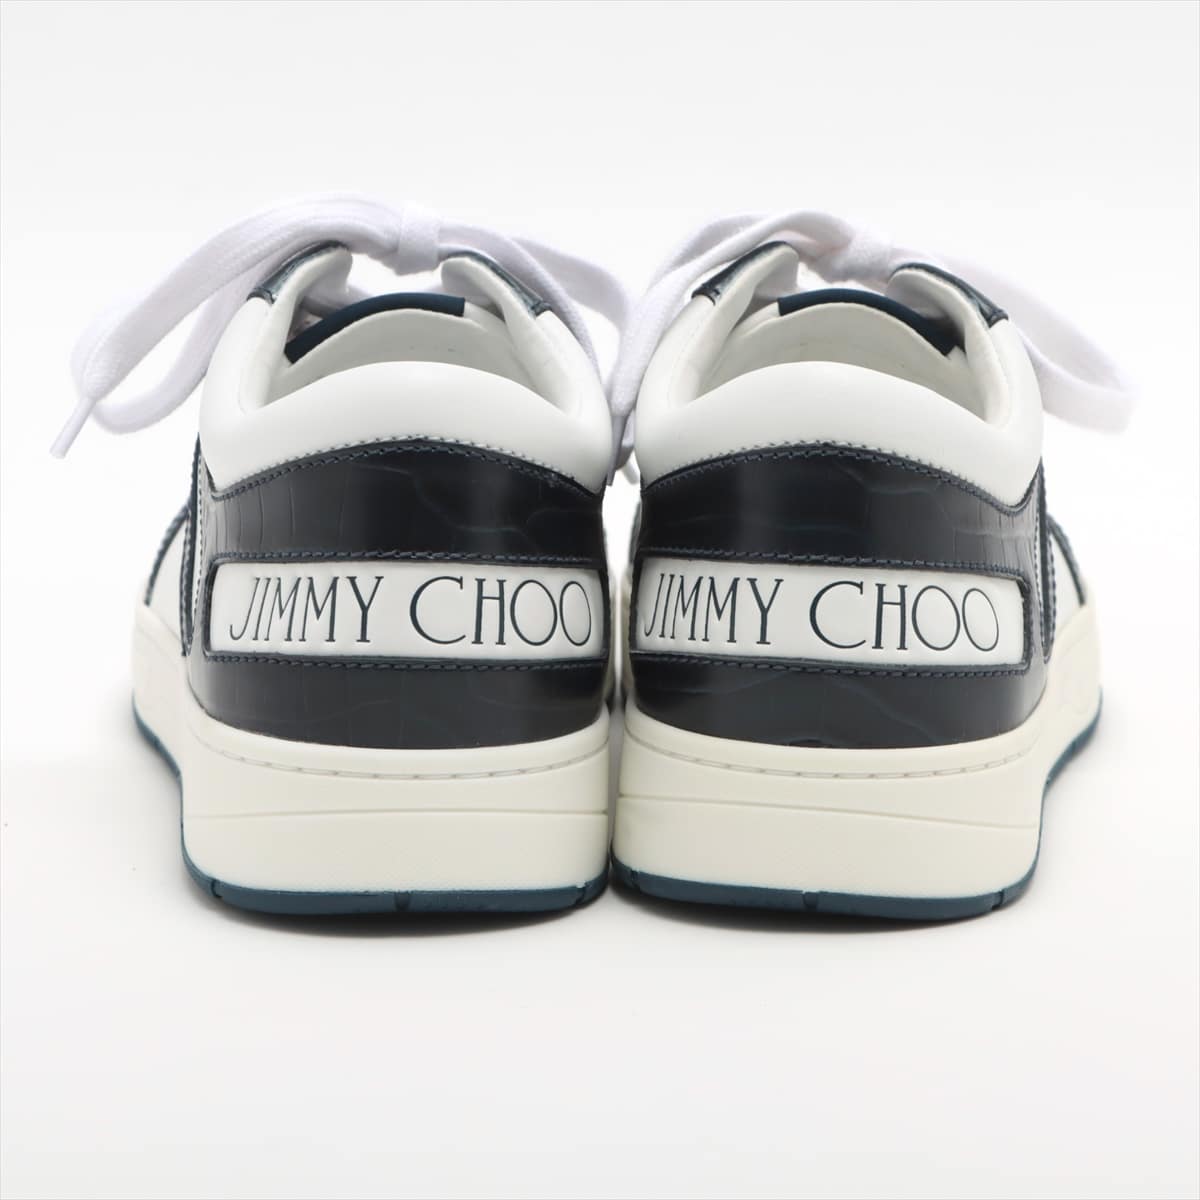 Jimmy Choo Leather Sneakers 42 Men's White x navy HAWAII There is a box